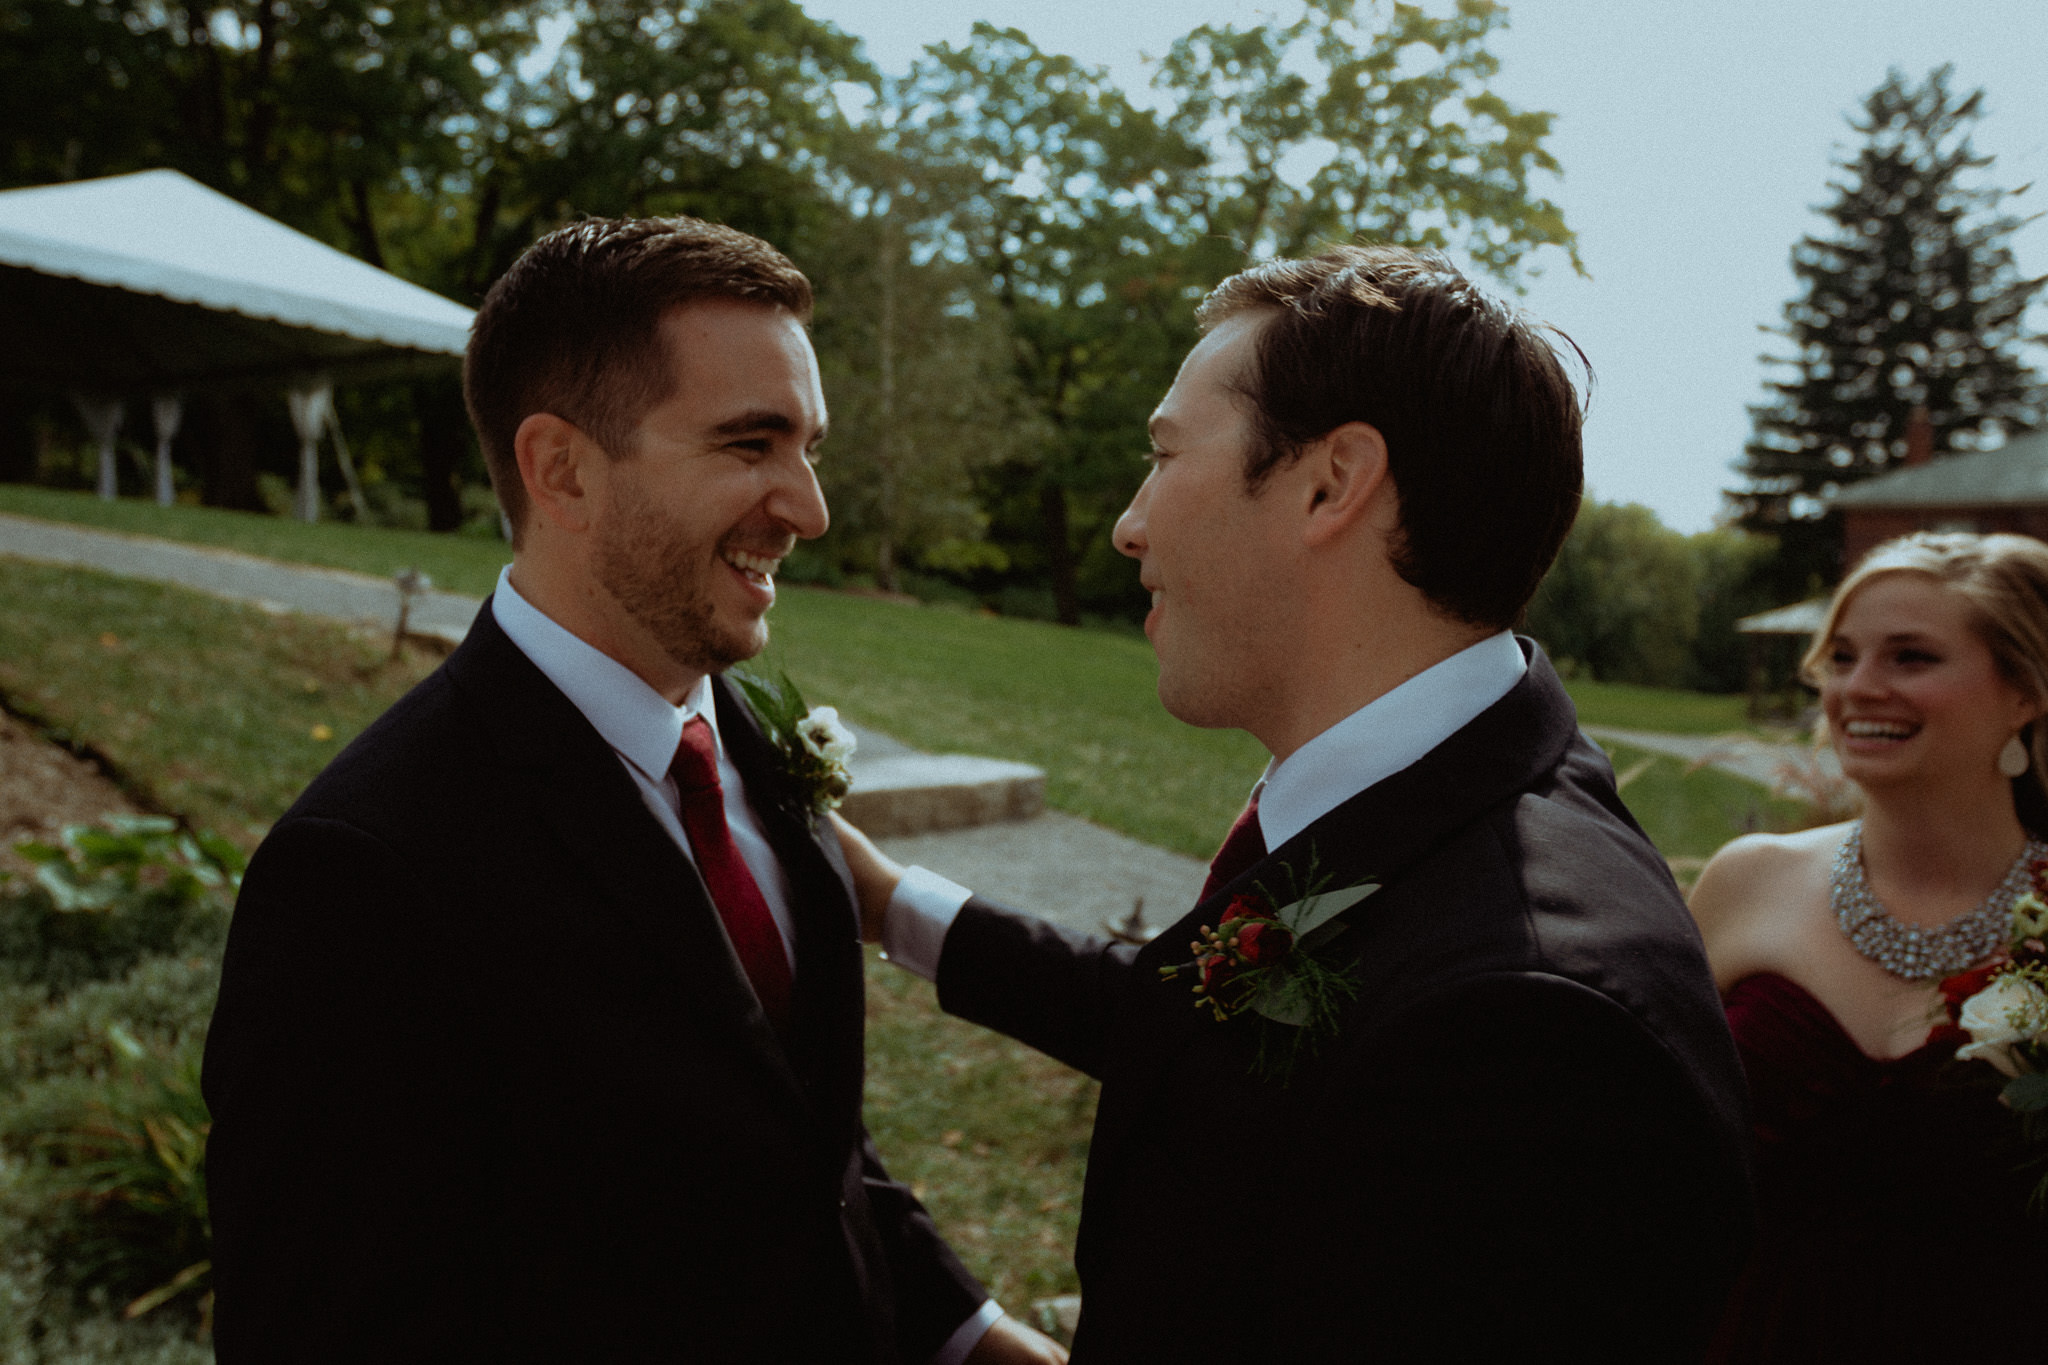 groom and best man after wedding ceremony